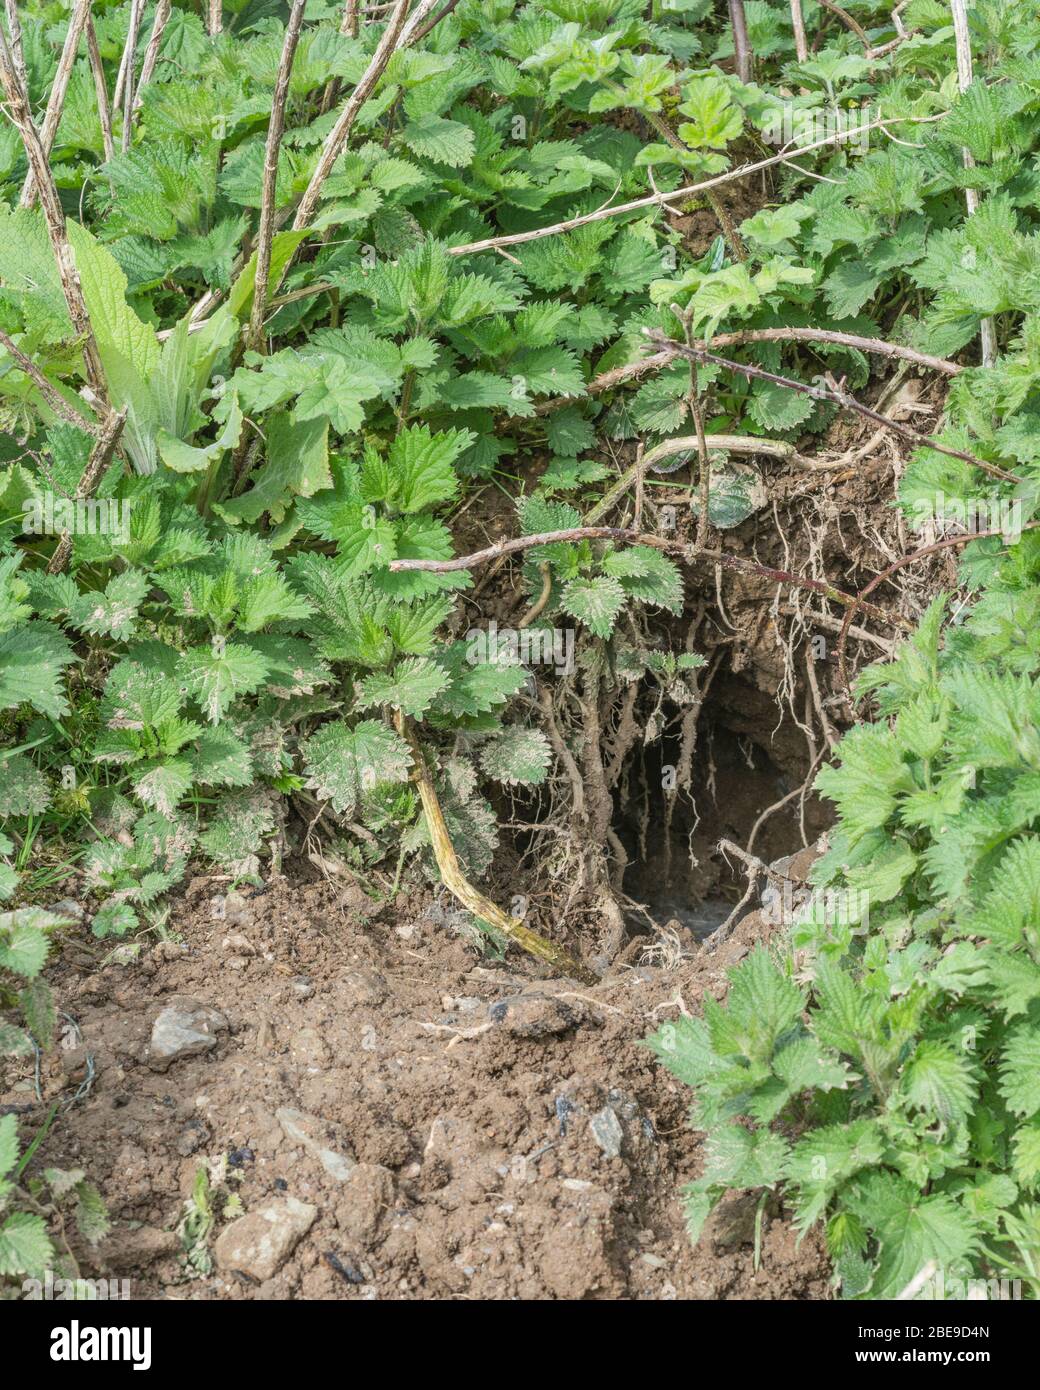 Rabbit hole in Cornish hedge bank. Metaphor Down the Rabbit Hole, conspiracy theories, animal burrows, entering the unknown, rabbit run, safe haven. Stock Photo